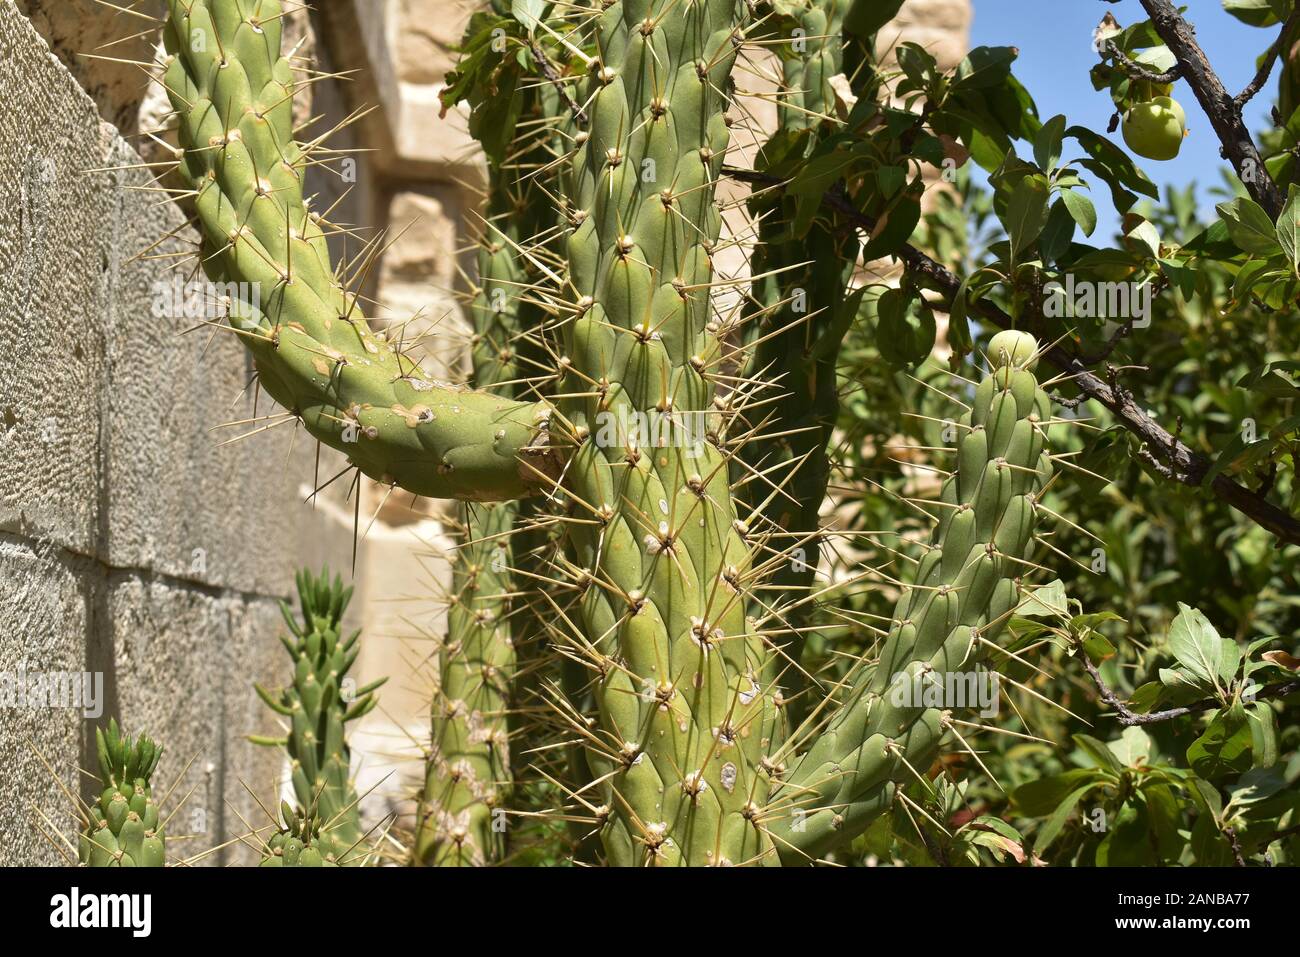 Cactus on a sunny day in Nablus West Bank Stock Photo